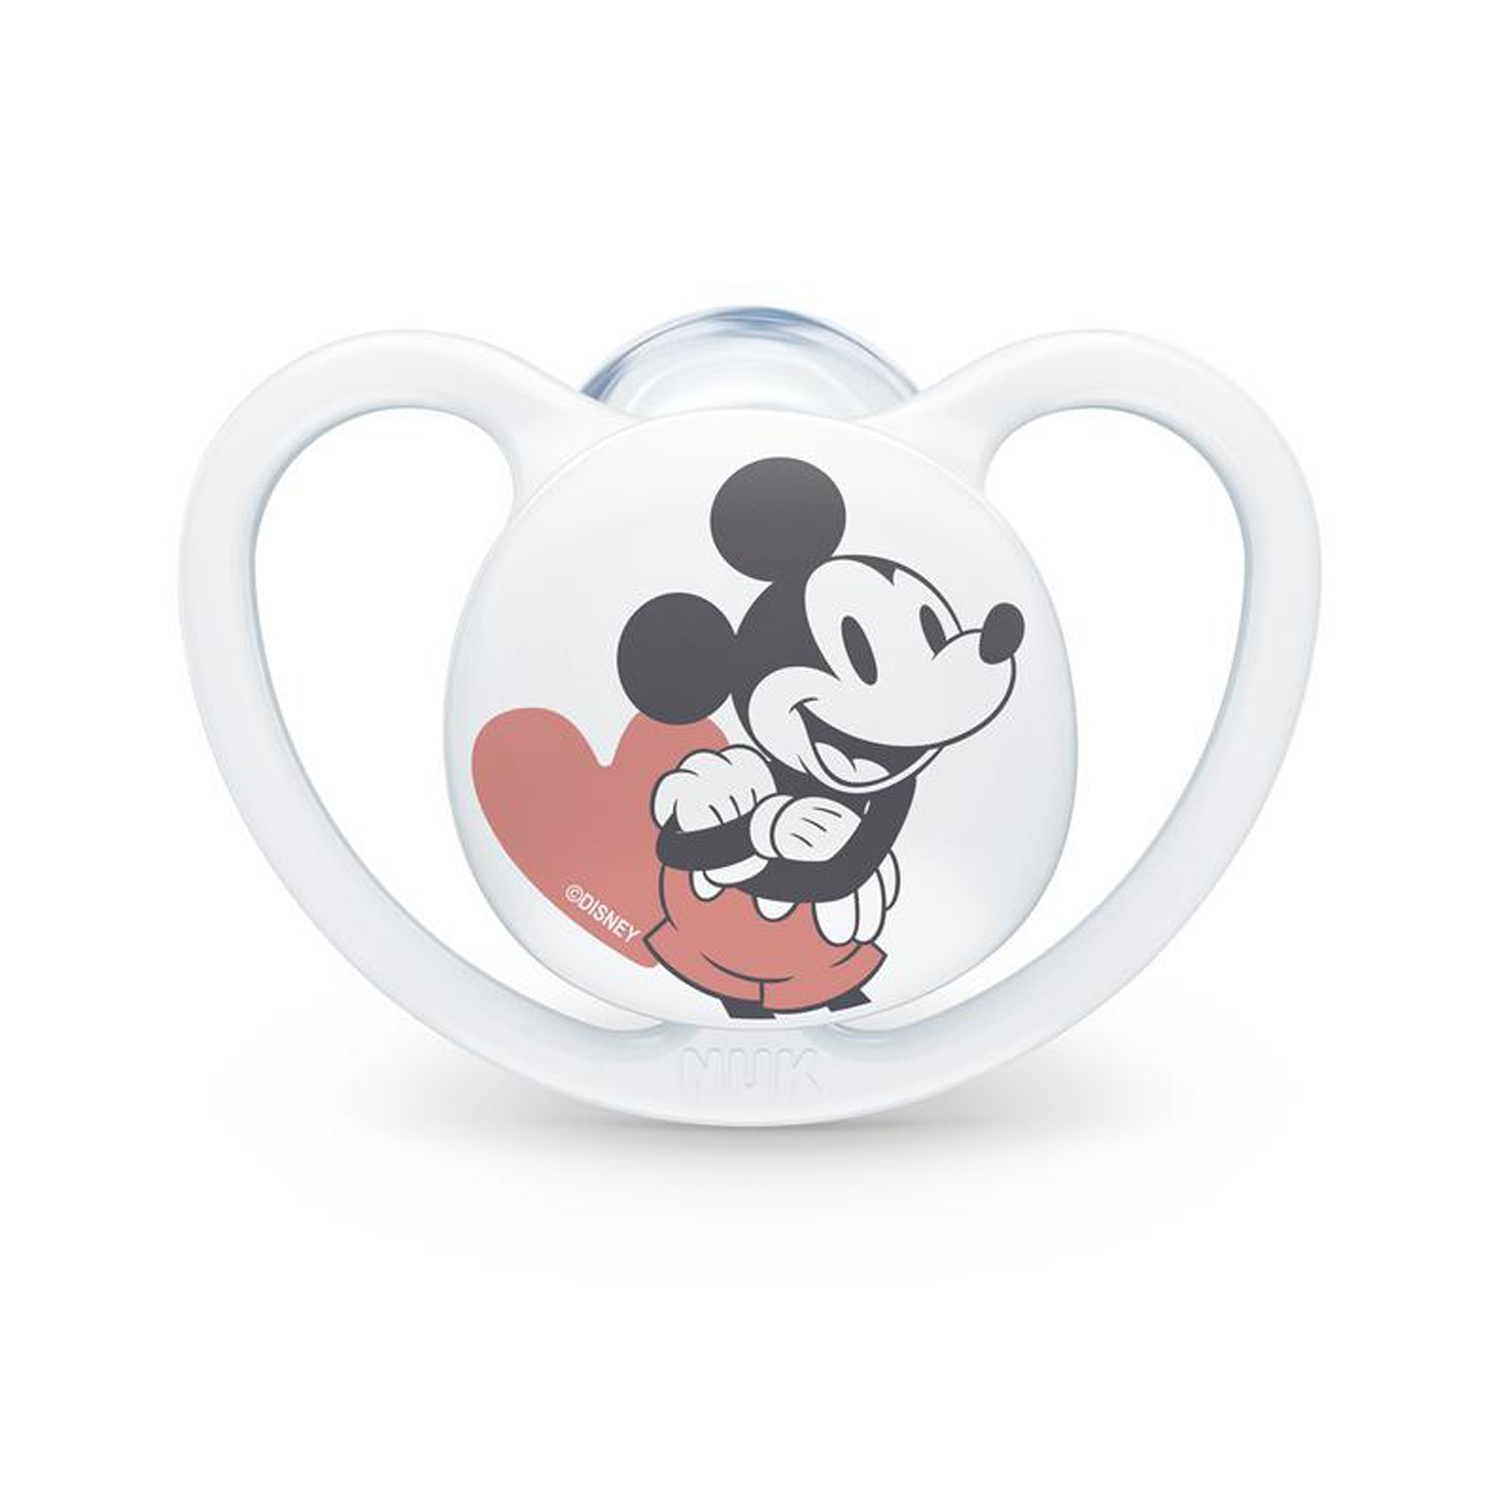 NUK® Disney Mickey Space Pacifier, Size 1, 2pk – Mixed Product Image 3 of 8